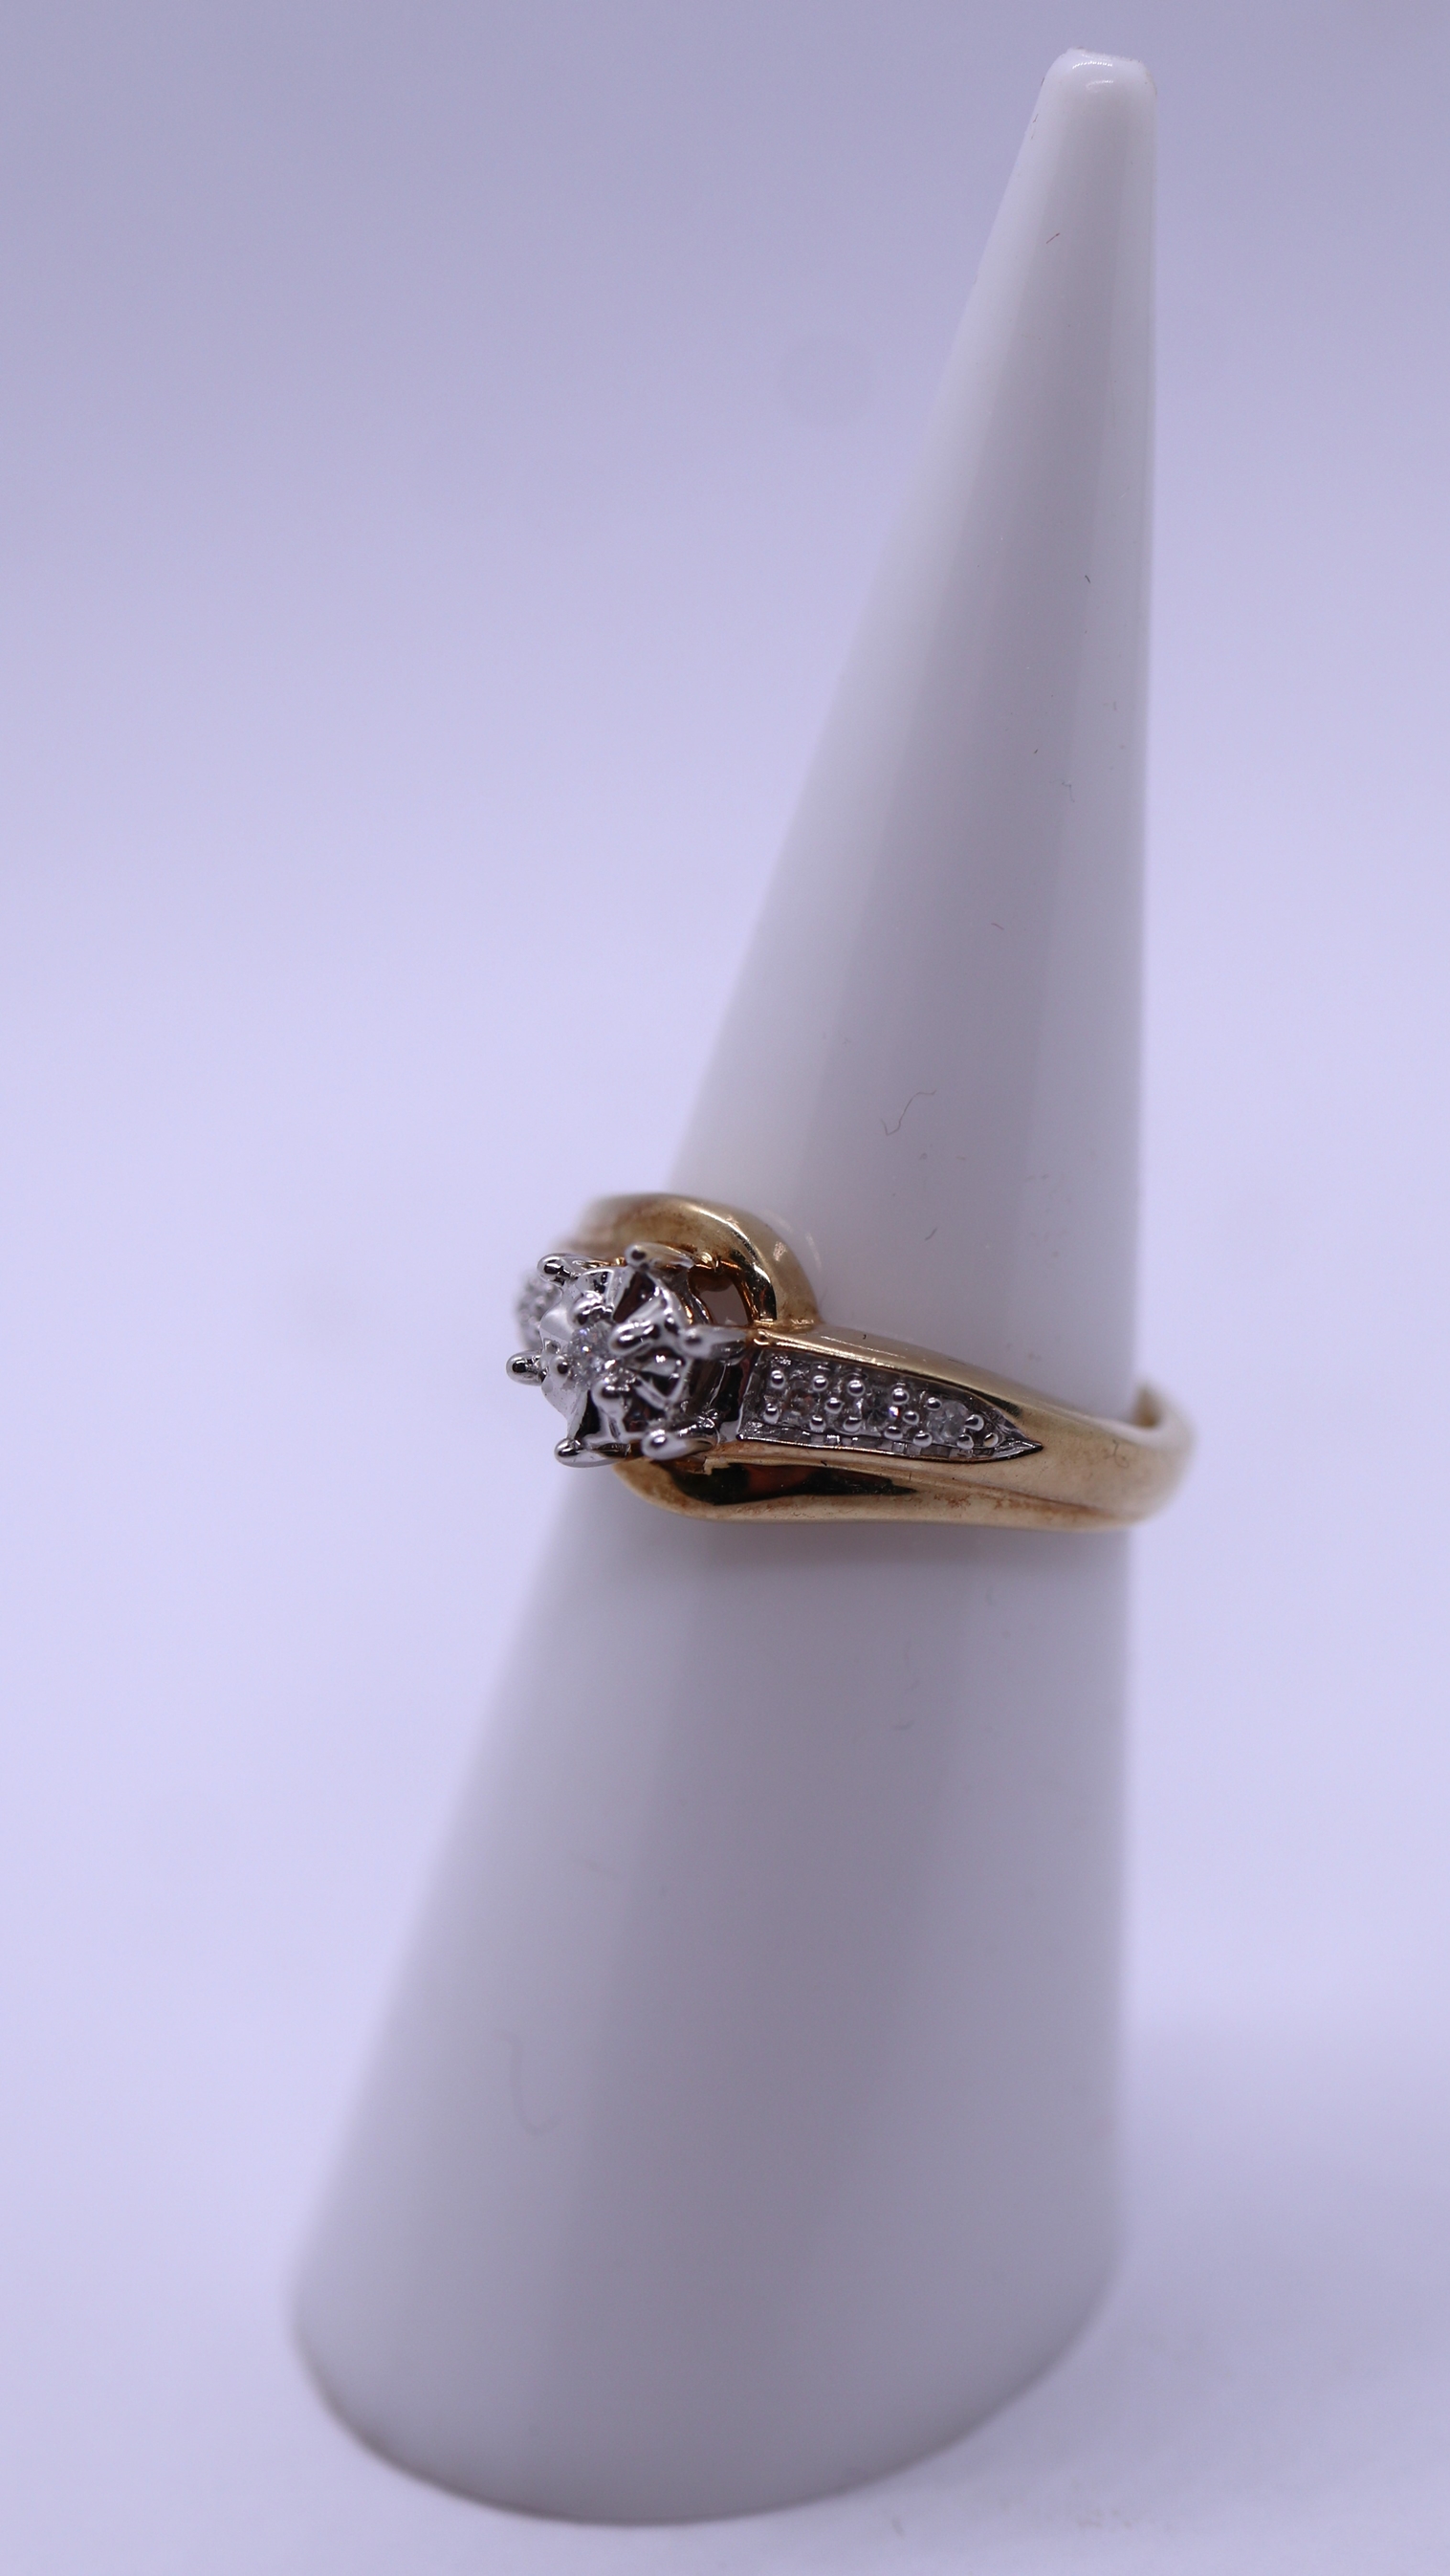 9ct gold diamond solitaire ring with diamond encrusted shoulders - Size I - Image 2 of 3